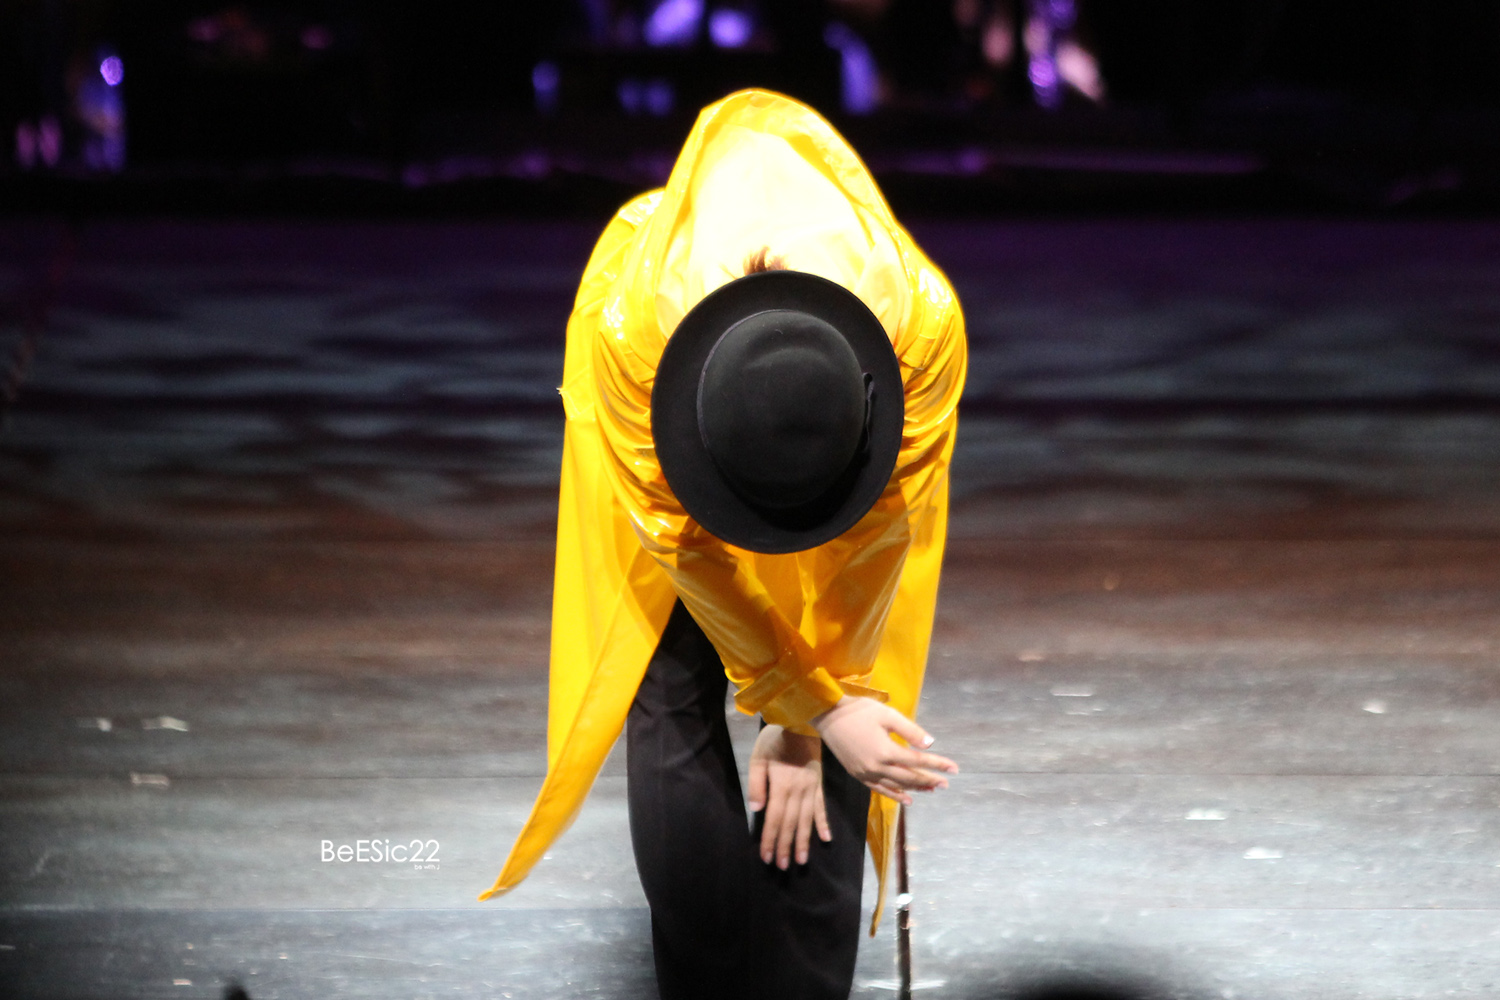 [OTHER][29-04-2014]Sunny sẽ tham gia vở nhạc kịch "SINGIN' IN THE RAIN" - Page 2 2122324C53A5938A1ED018